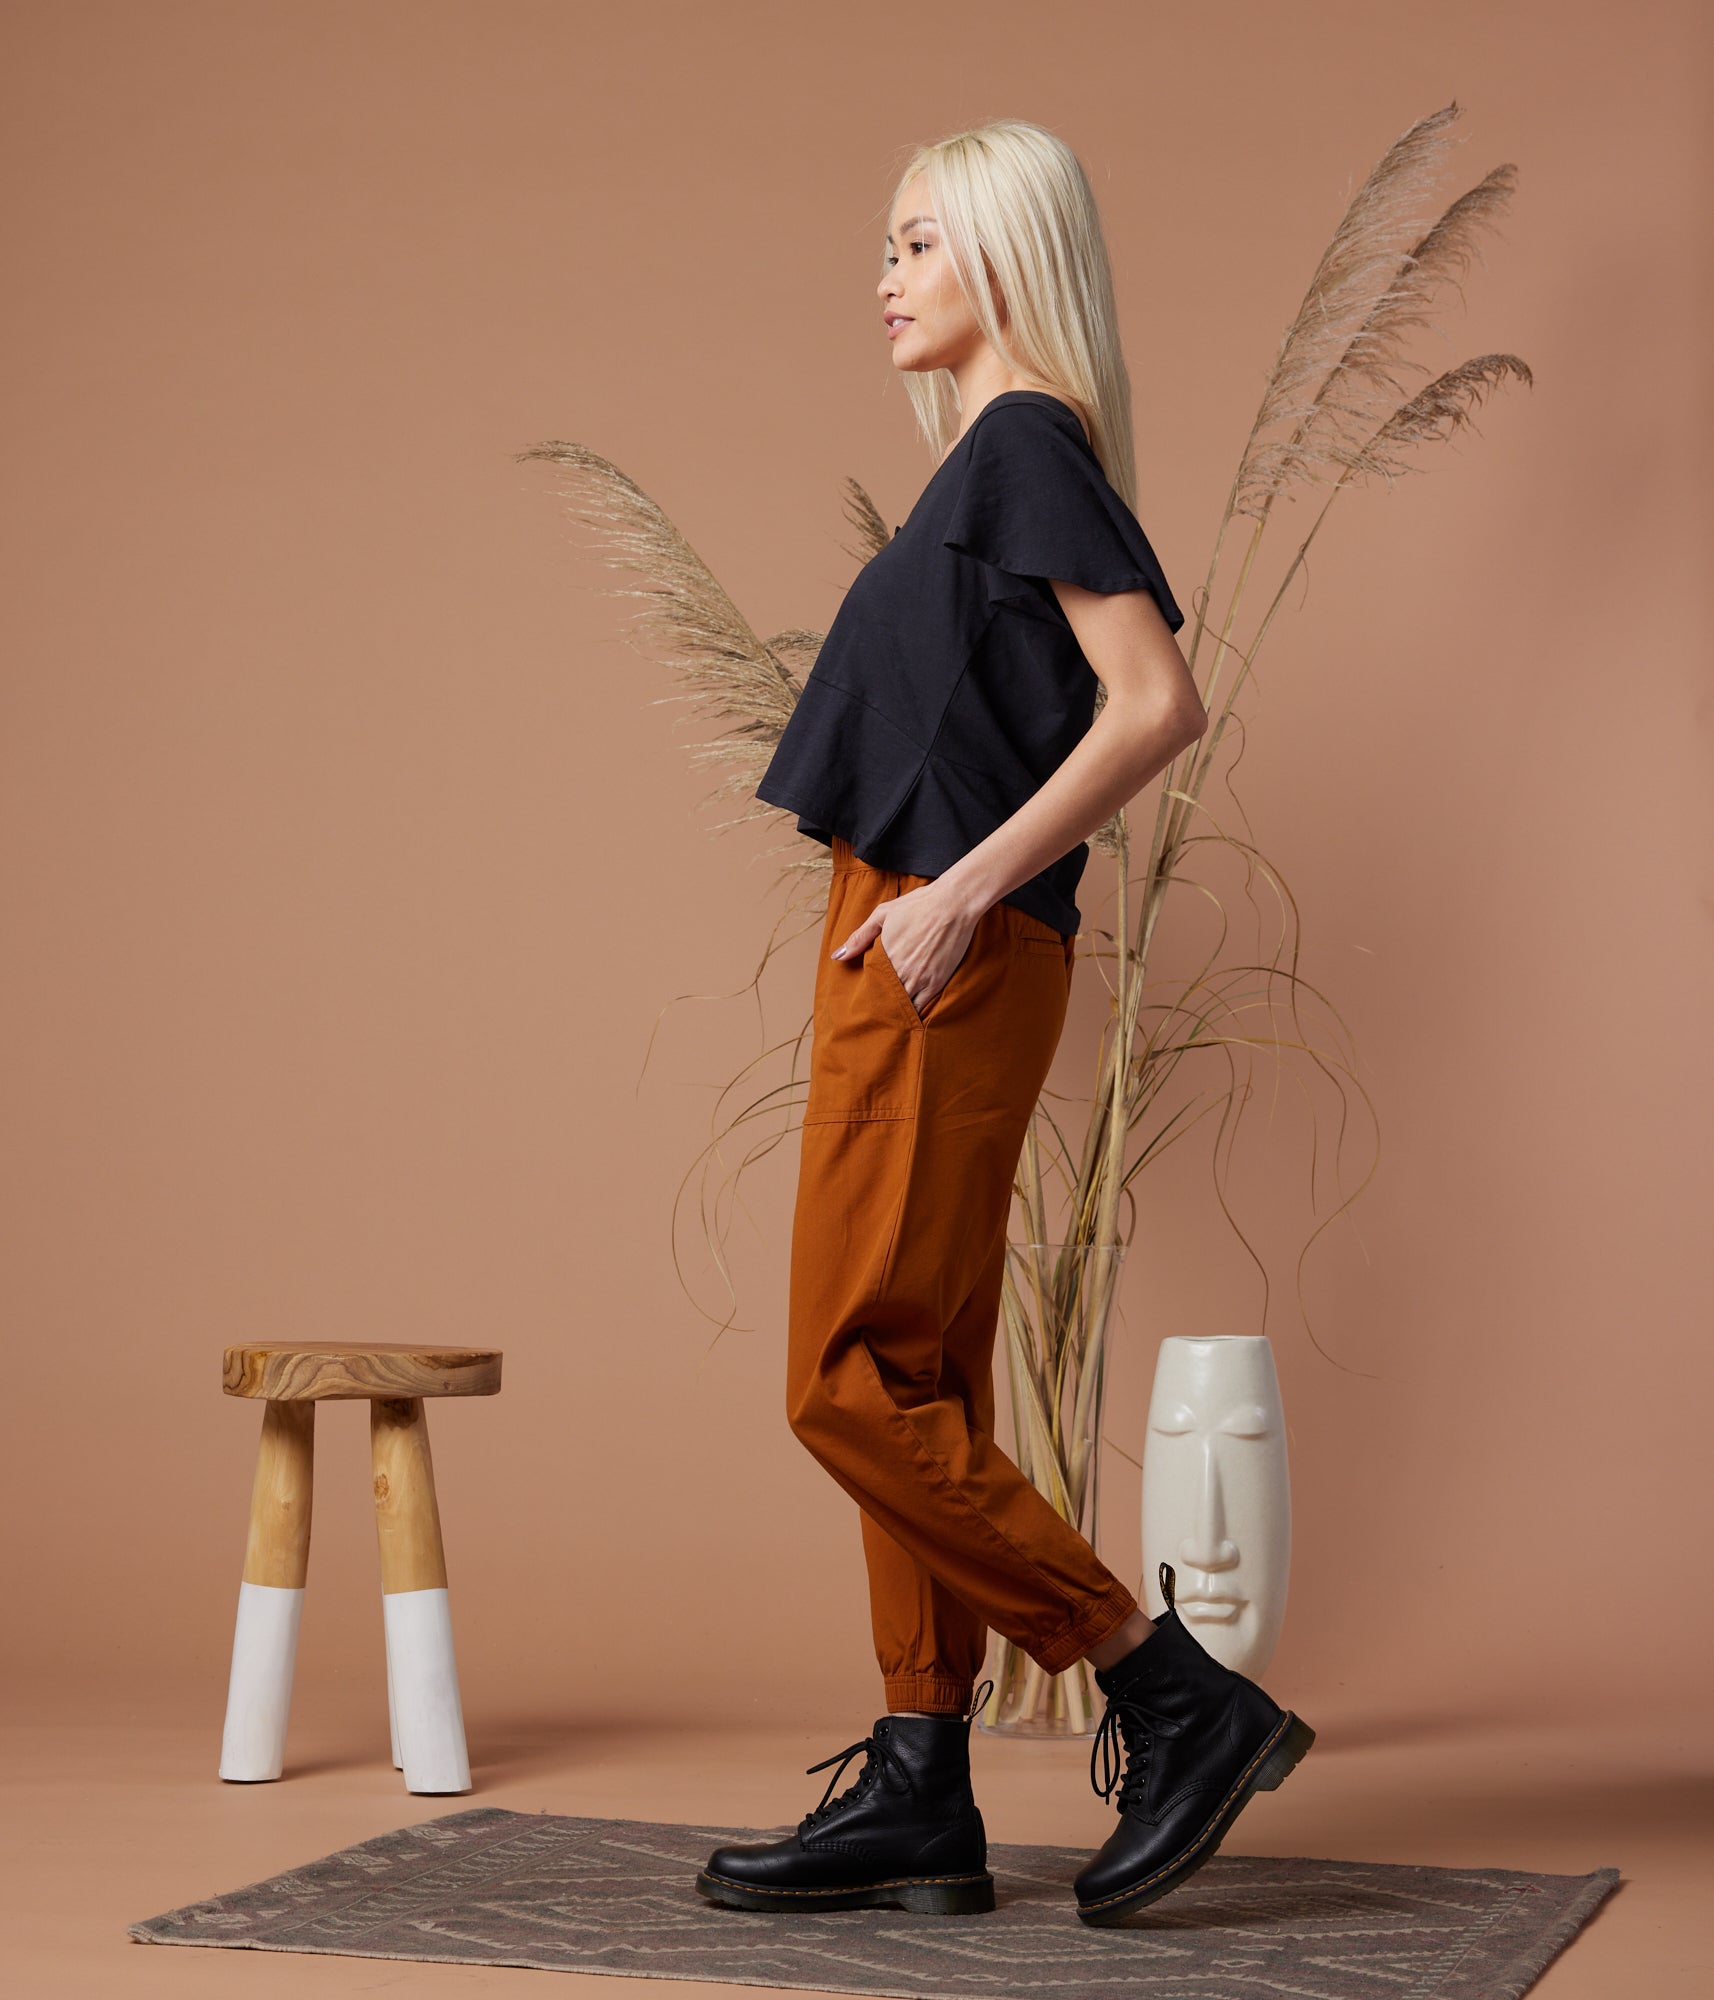 Lesley Pant by Known Supply